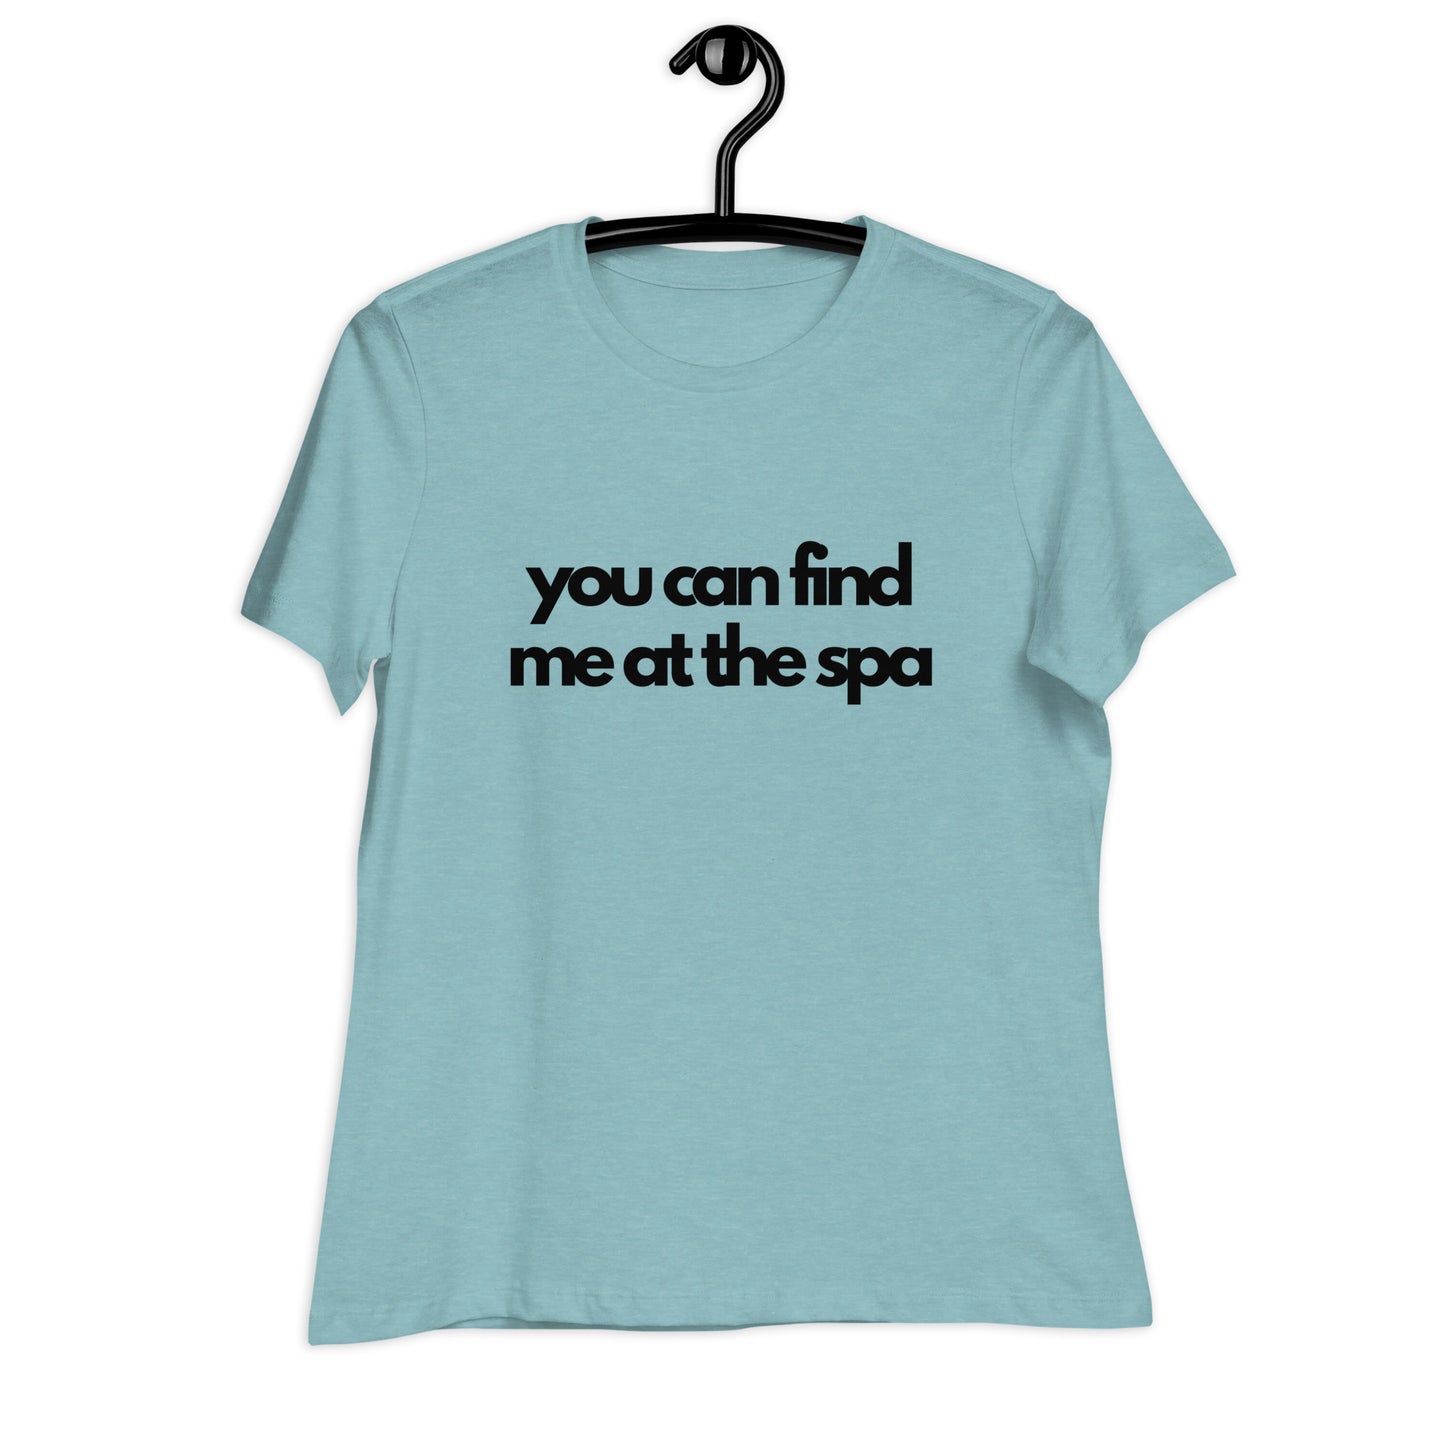 Women's Relaxed T-Shirt - You Can Find Me at the Spa